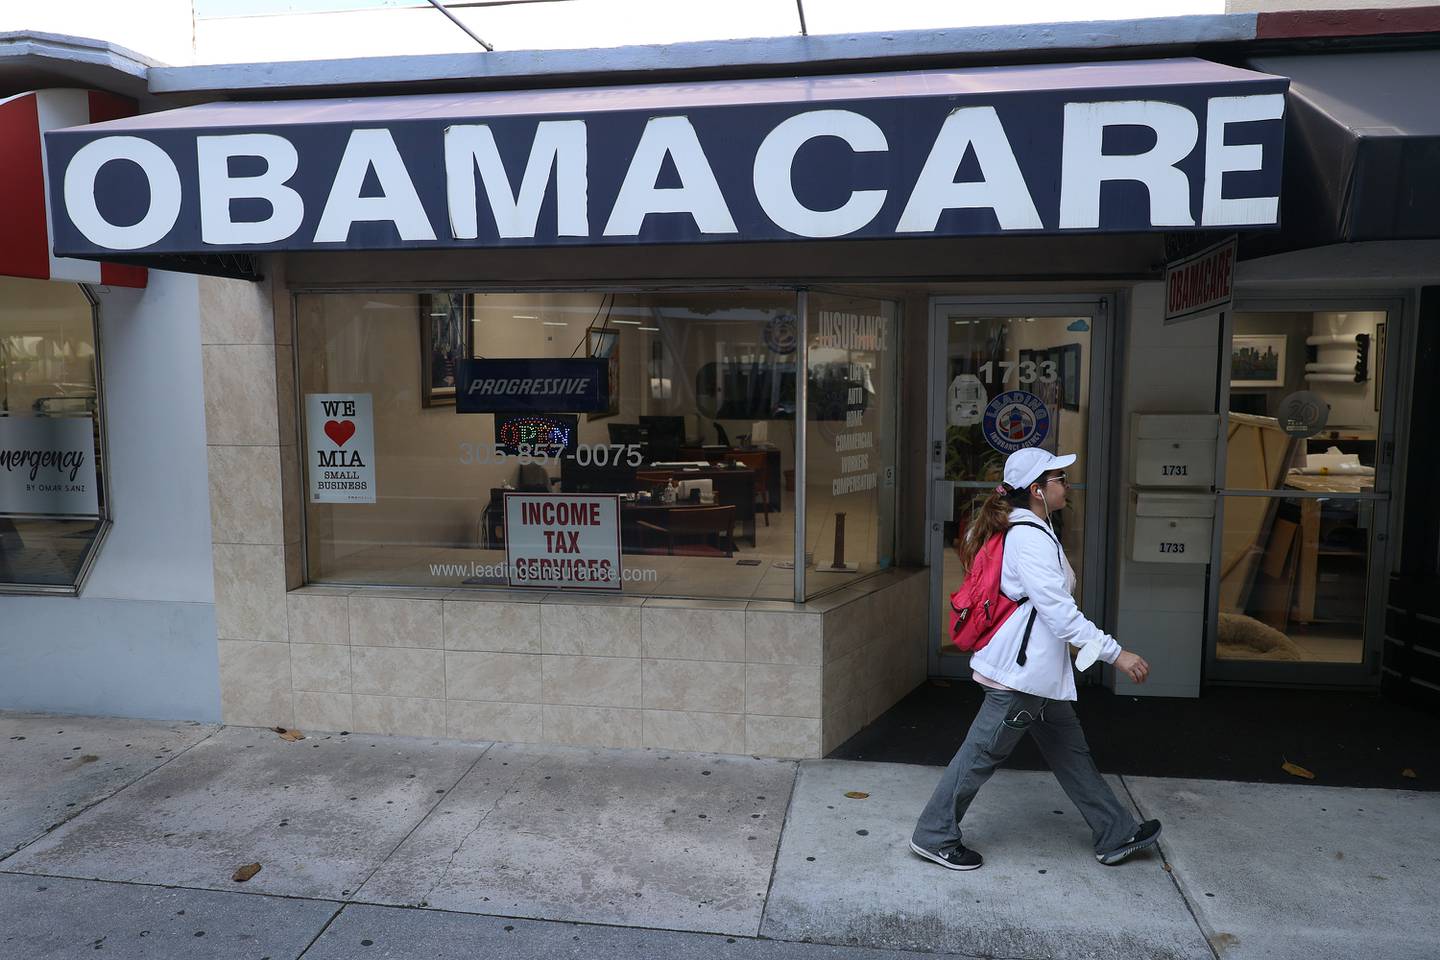 MIAMI, FLORIDA - JANUARY 28: A pedestrian walks past the Leading Insurance Agency, which offers plans under the Affordable Care Act (also known as Obamacare) on January 28, 2021 in Miami, Florida.